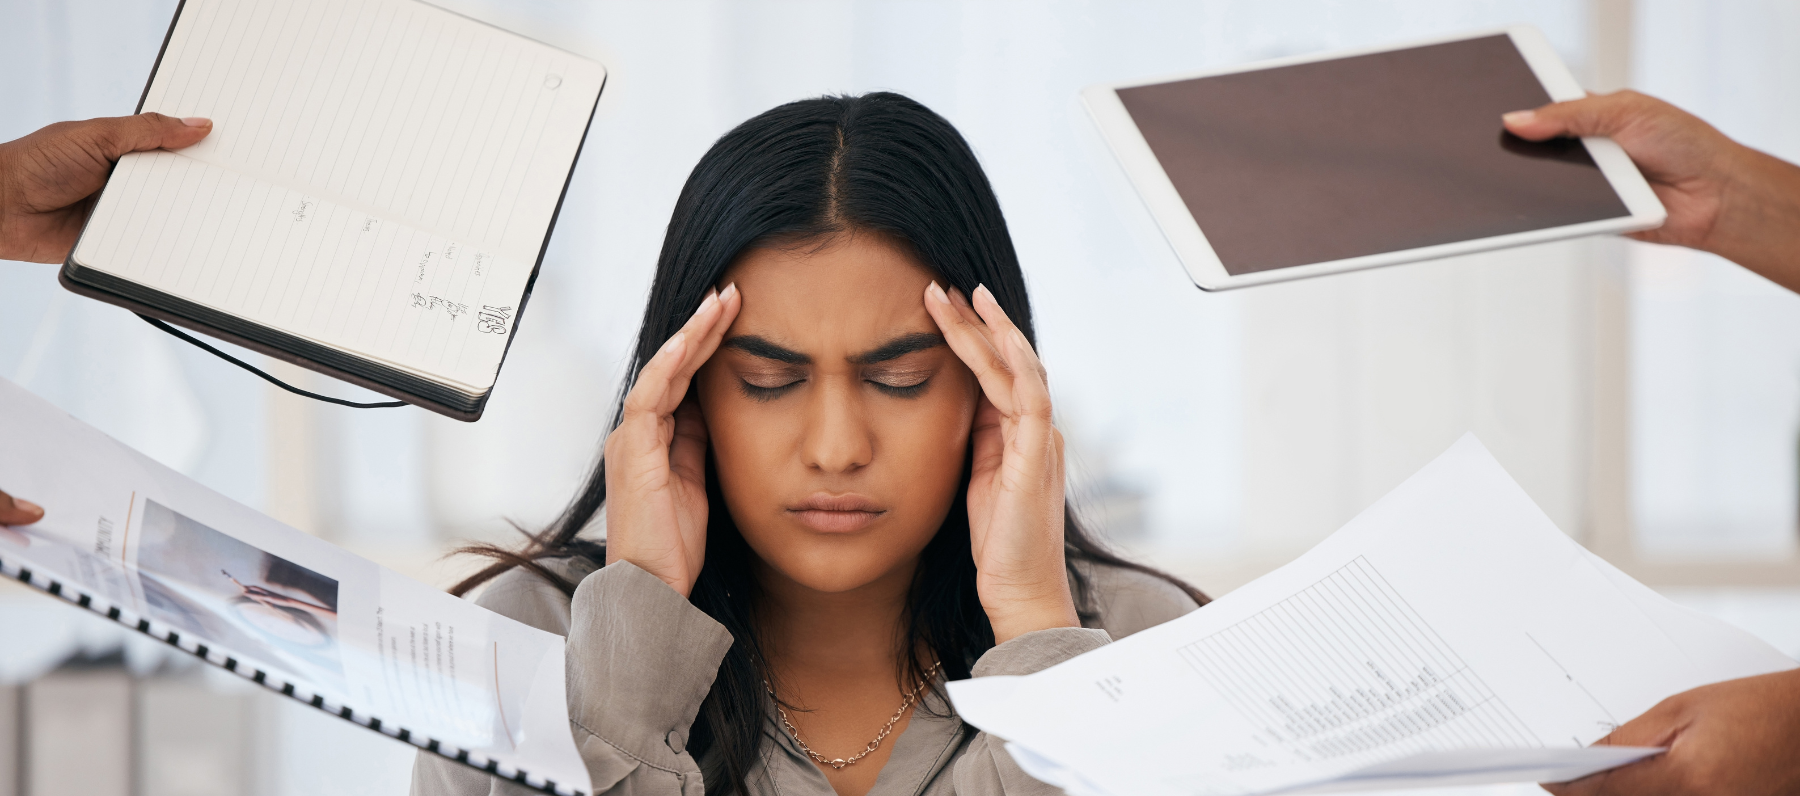 Addressing Employee Burnout and the Top 3 Signs To Recognize It